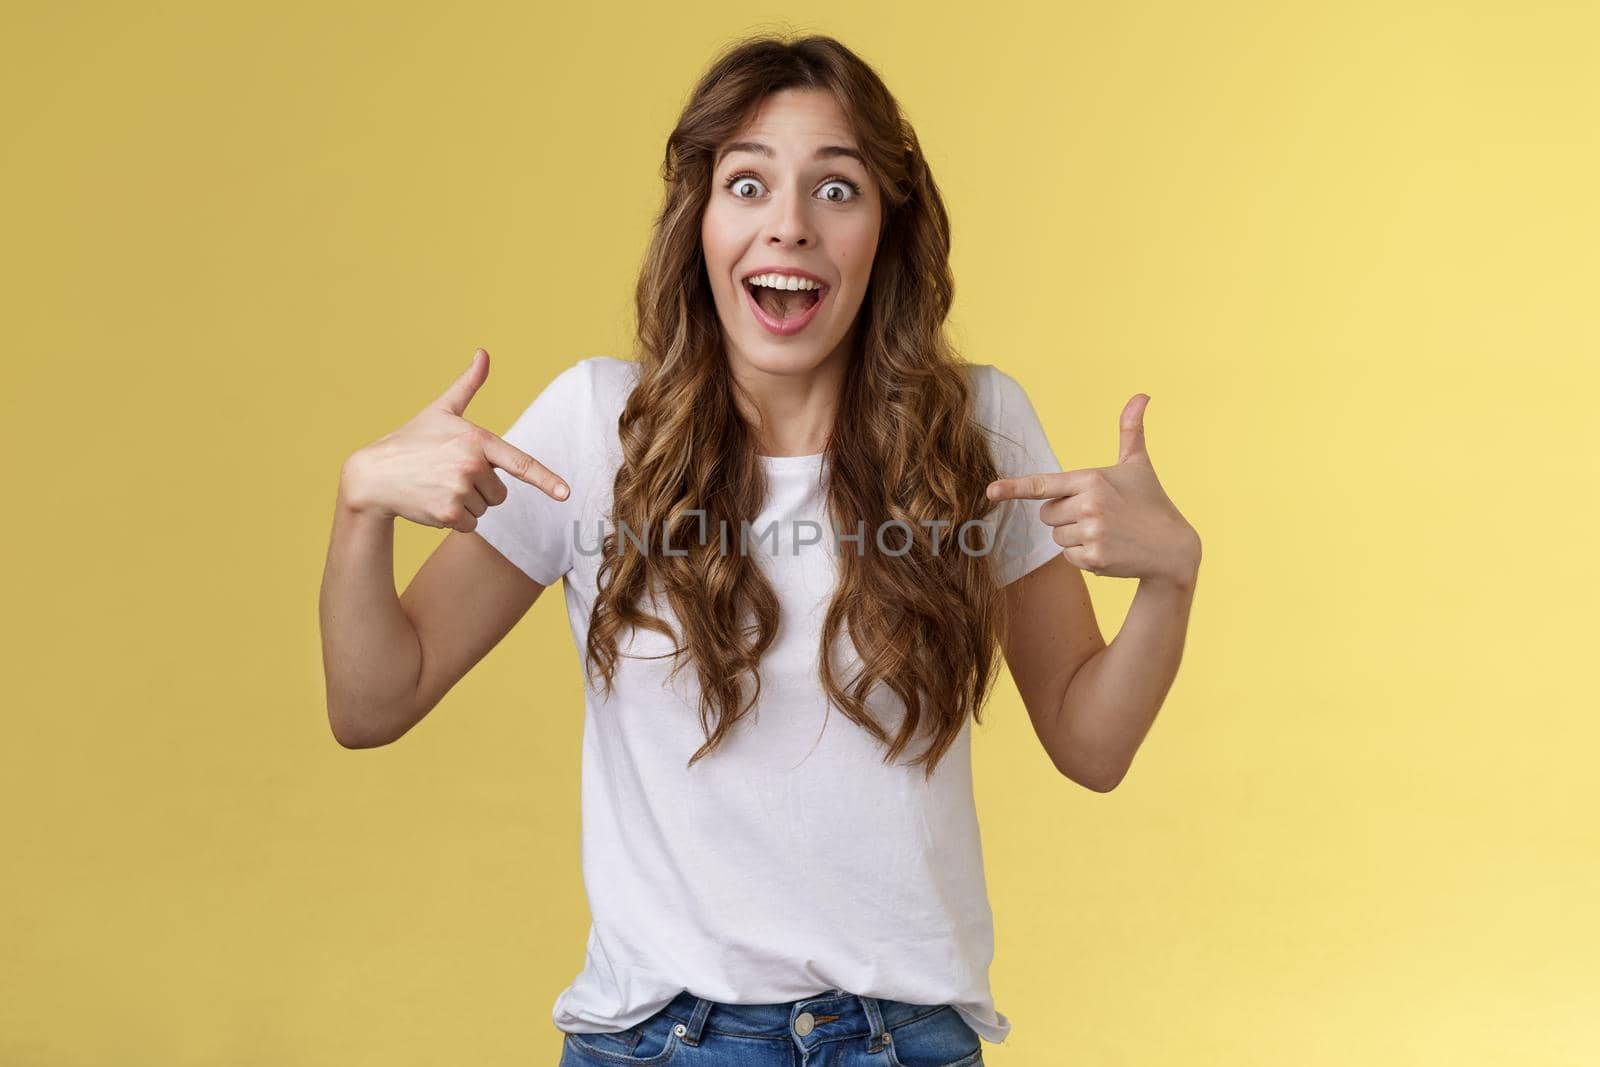 Can you believe, fascinating. Impressed sociable cute girl telling friend excellent near being picked got job pointing index fingers herself center copy space white t-shirt stare surprised smiling.